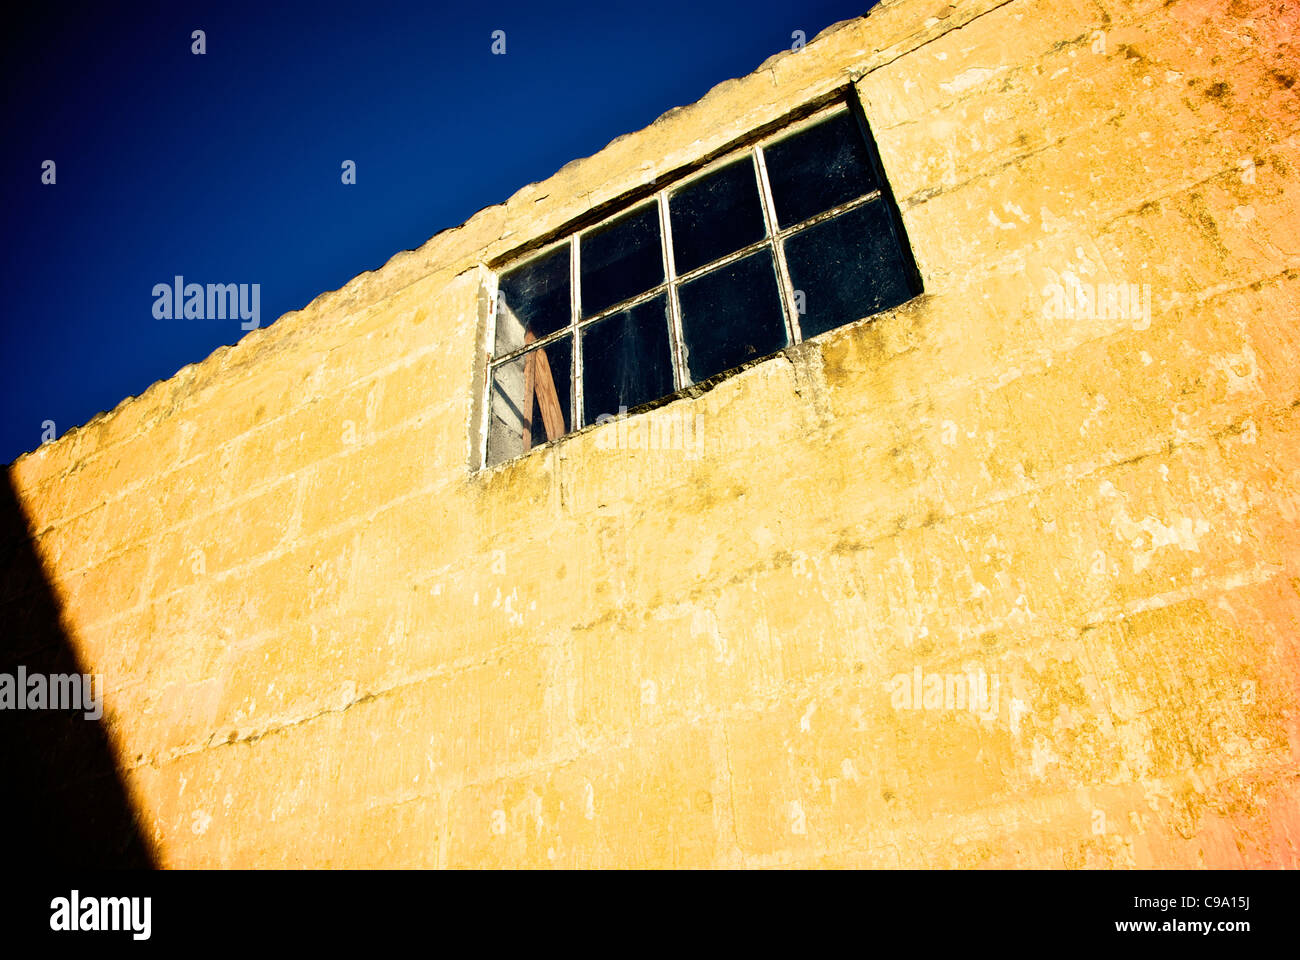 OLD YELLOW WALL WITH WINDOW Stock Photo